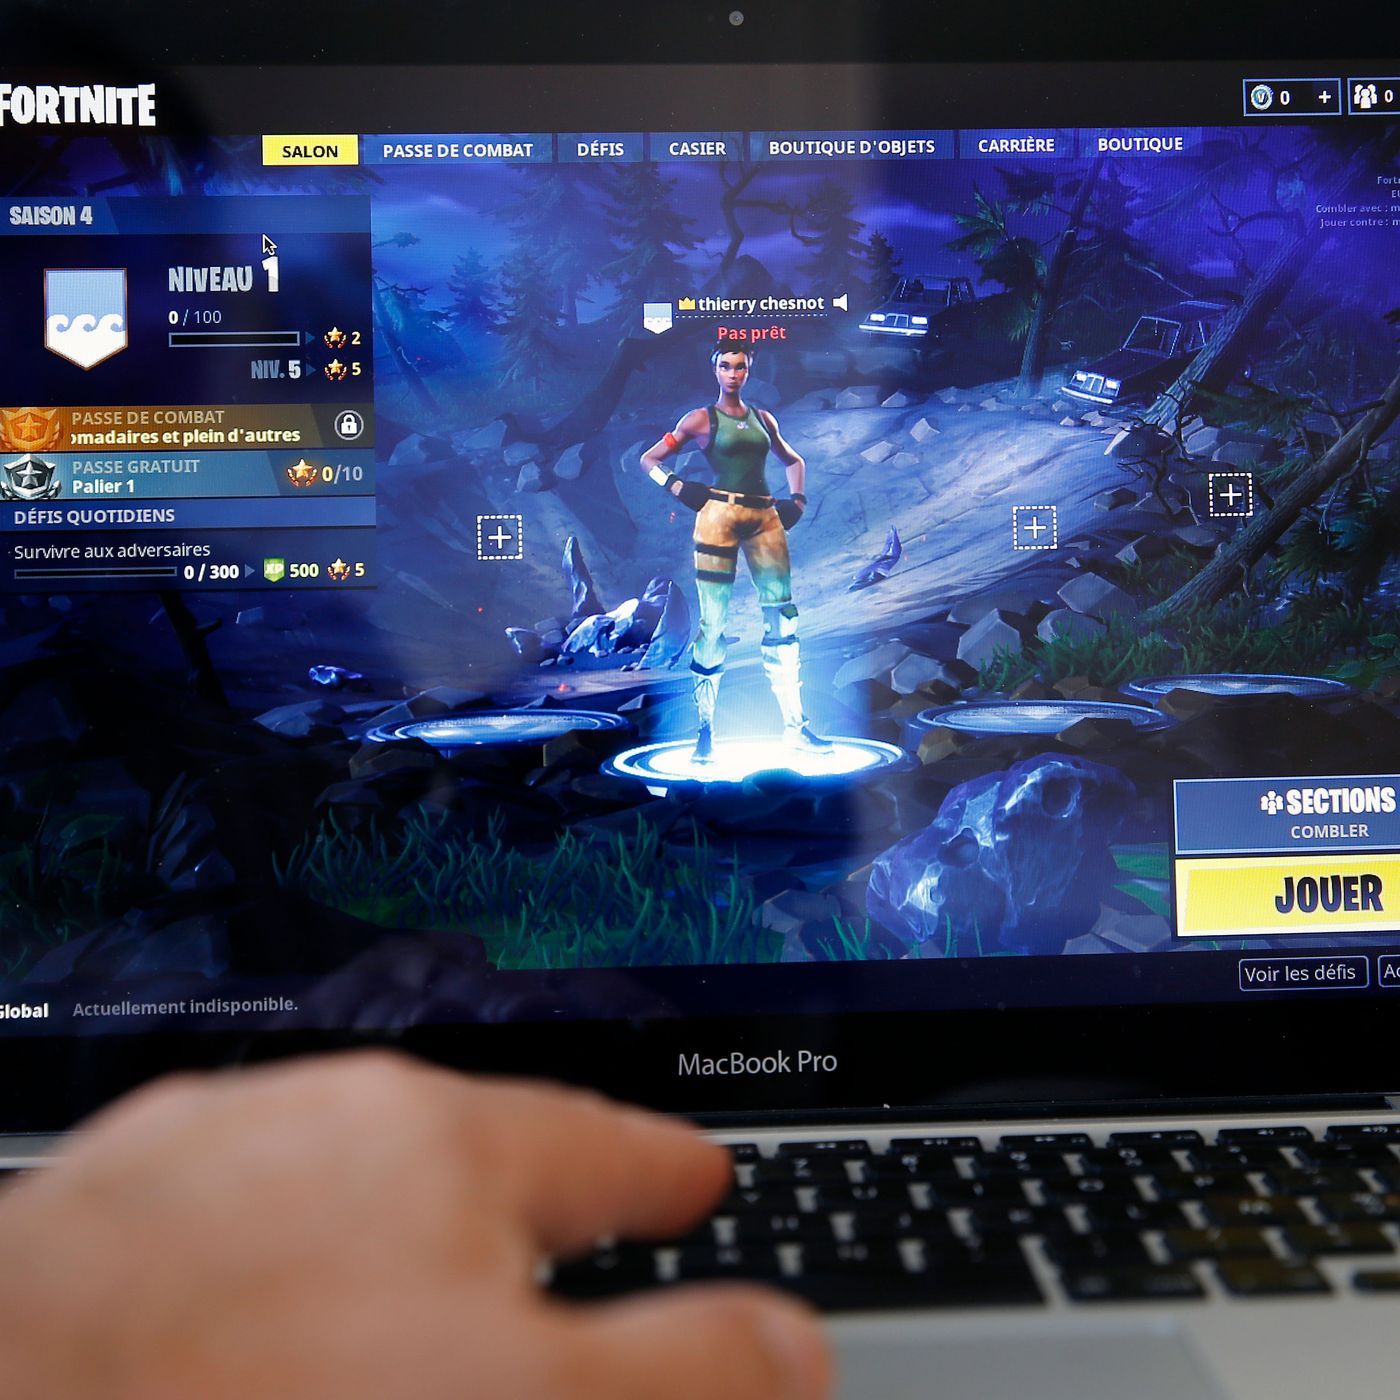 How would you keep 125 million gamers playing smoothly online? Epic Games  shares its Fortnite story.